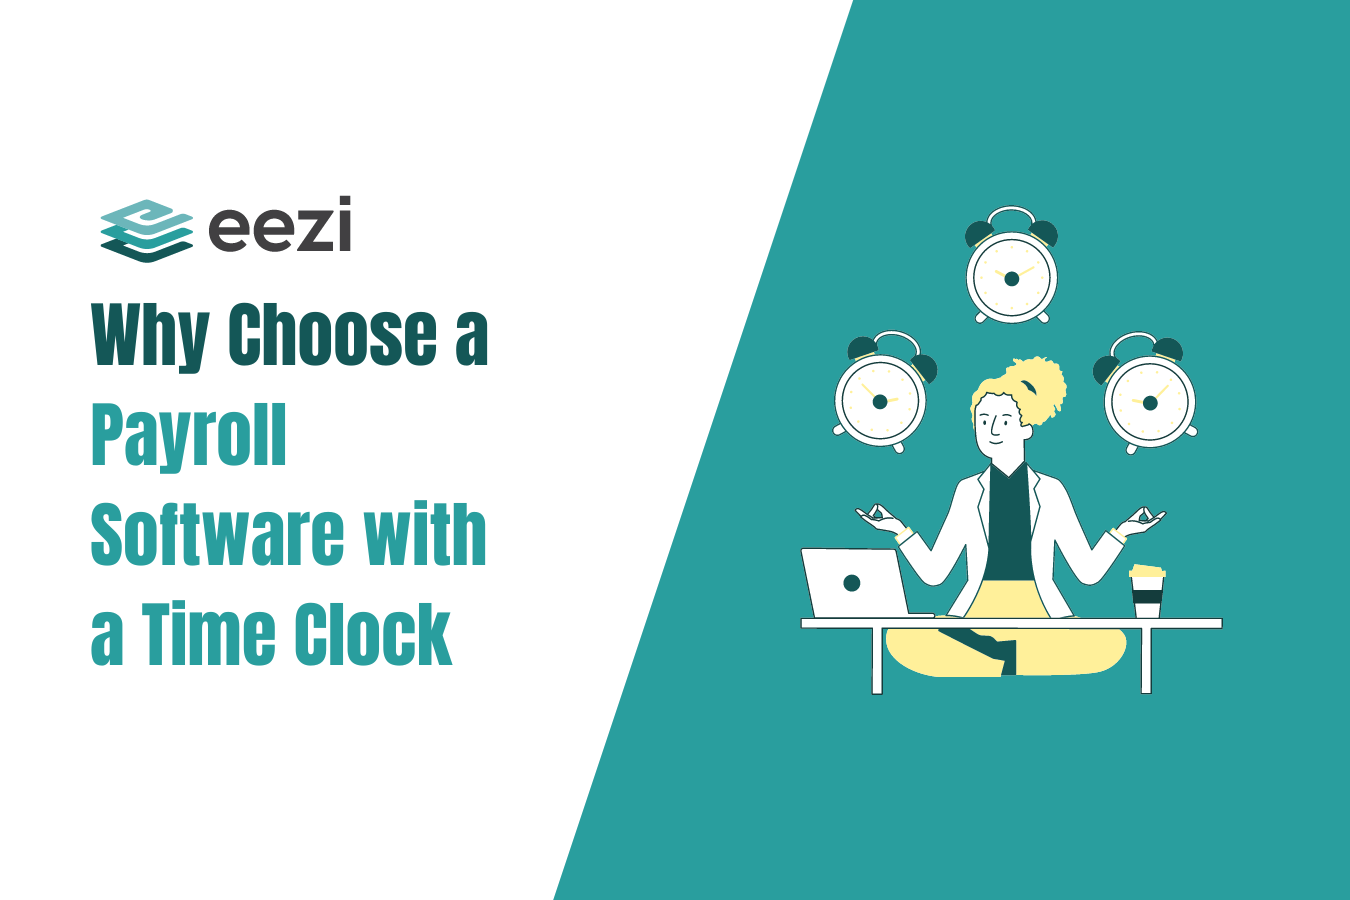 Why Choose Payroll Software with Time Clock